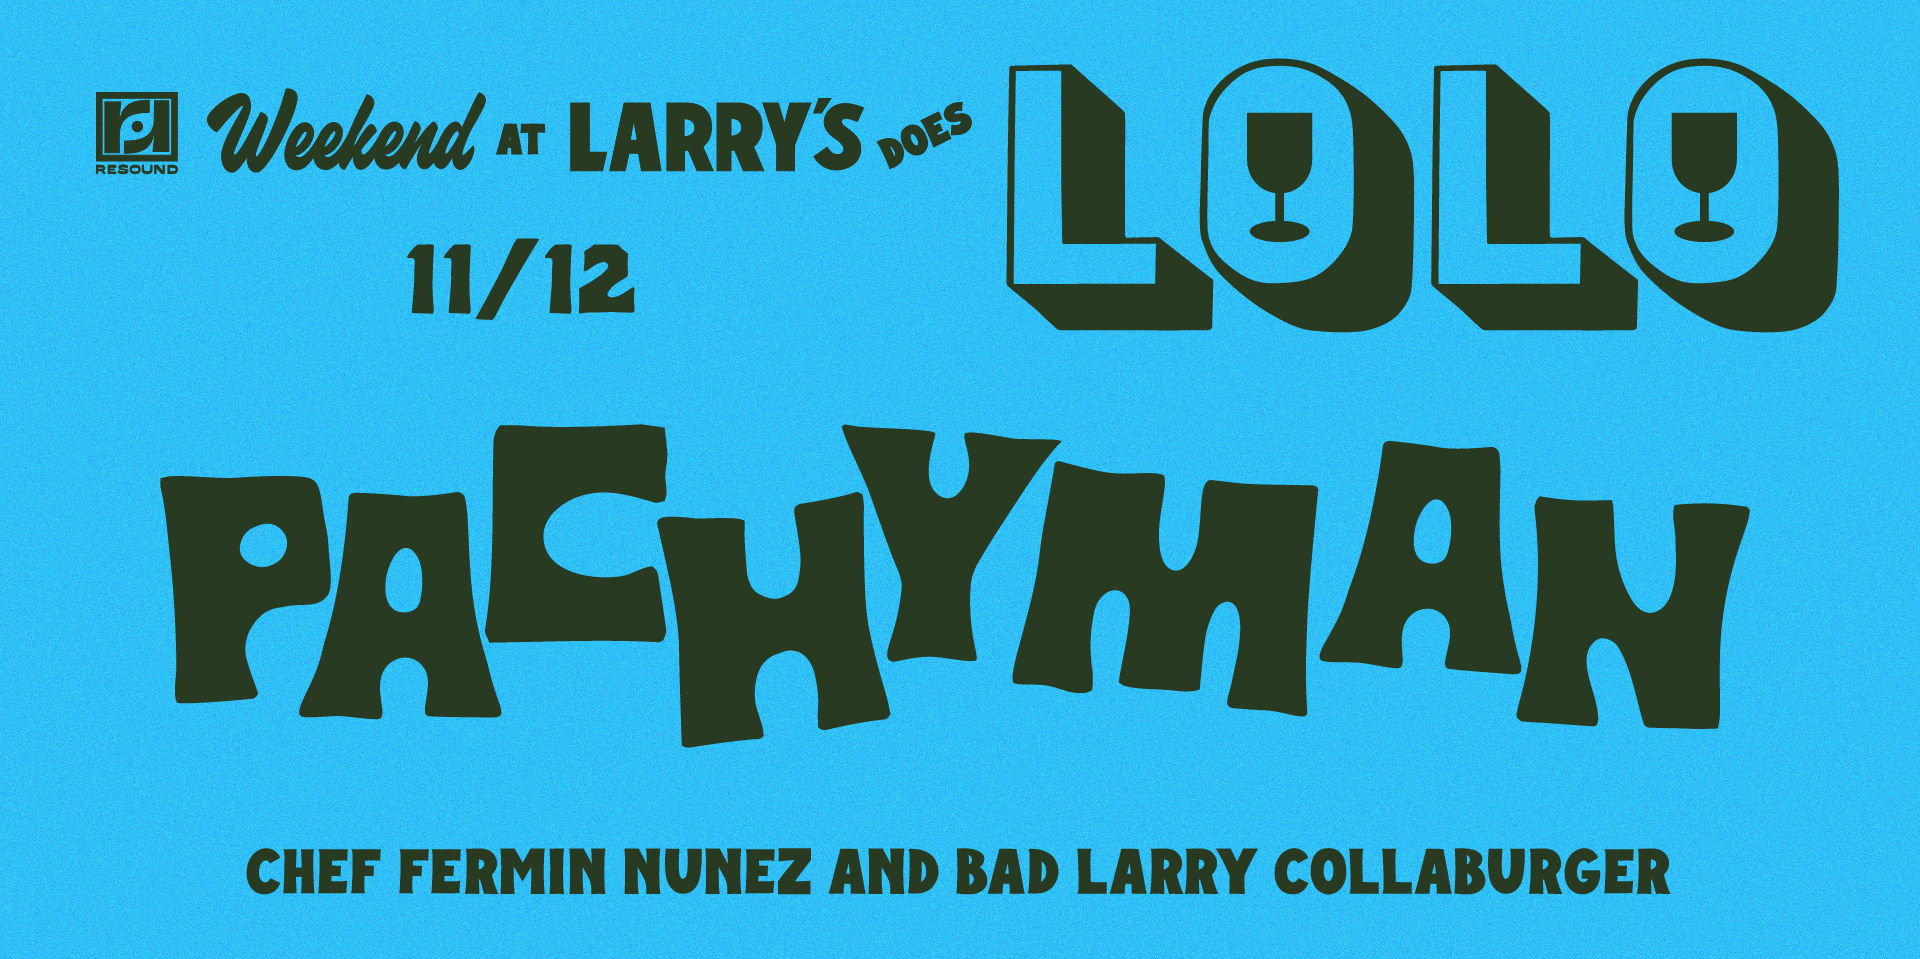  Weekend at Larry's Does LoLo on 11/12 promotional image